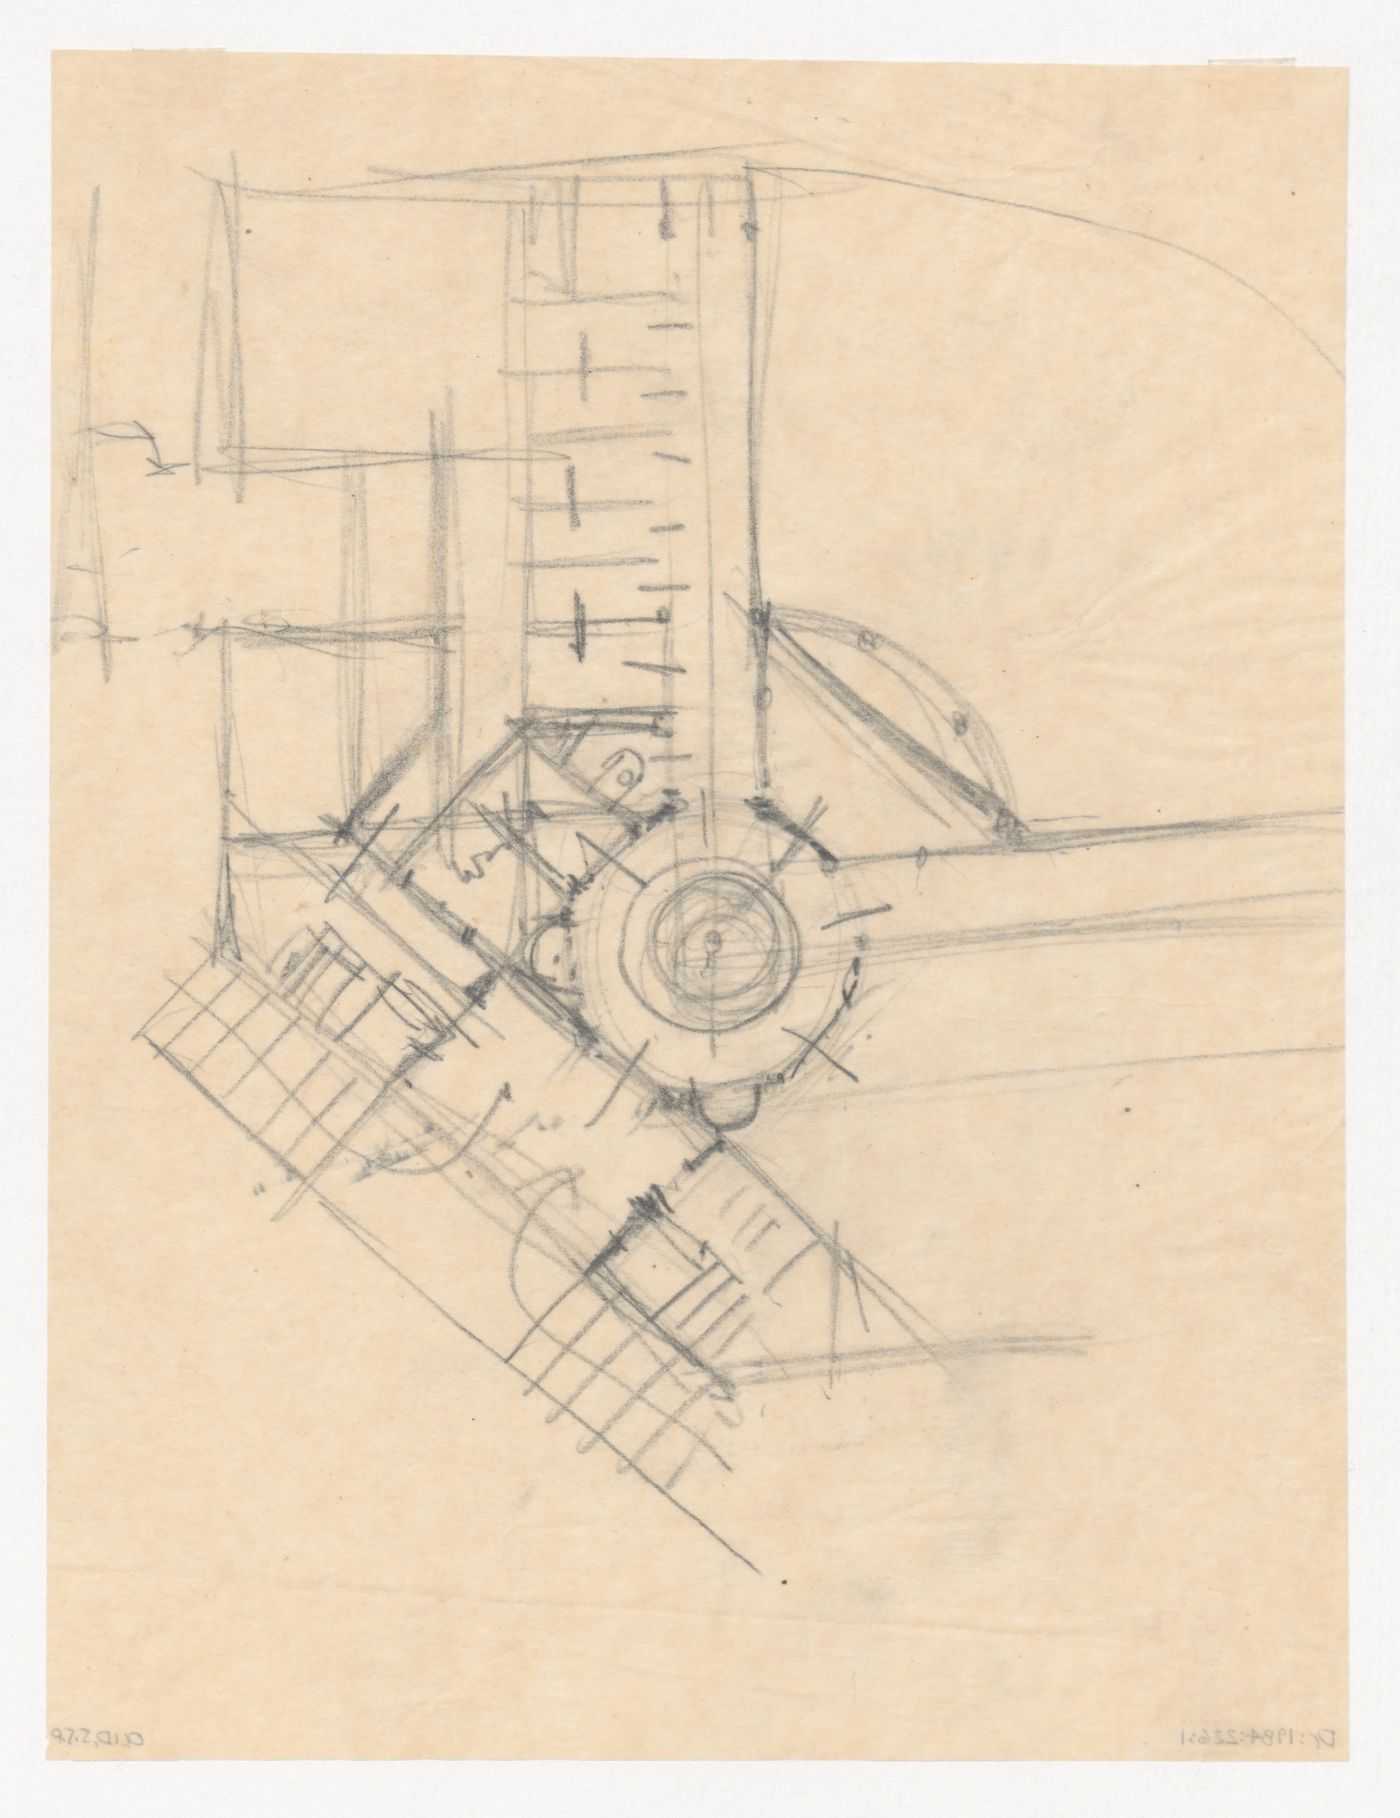 Sketch plan for a city hall for the reconstruction of the Hofplein (city centre), Rotterdam, Netherlands